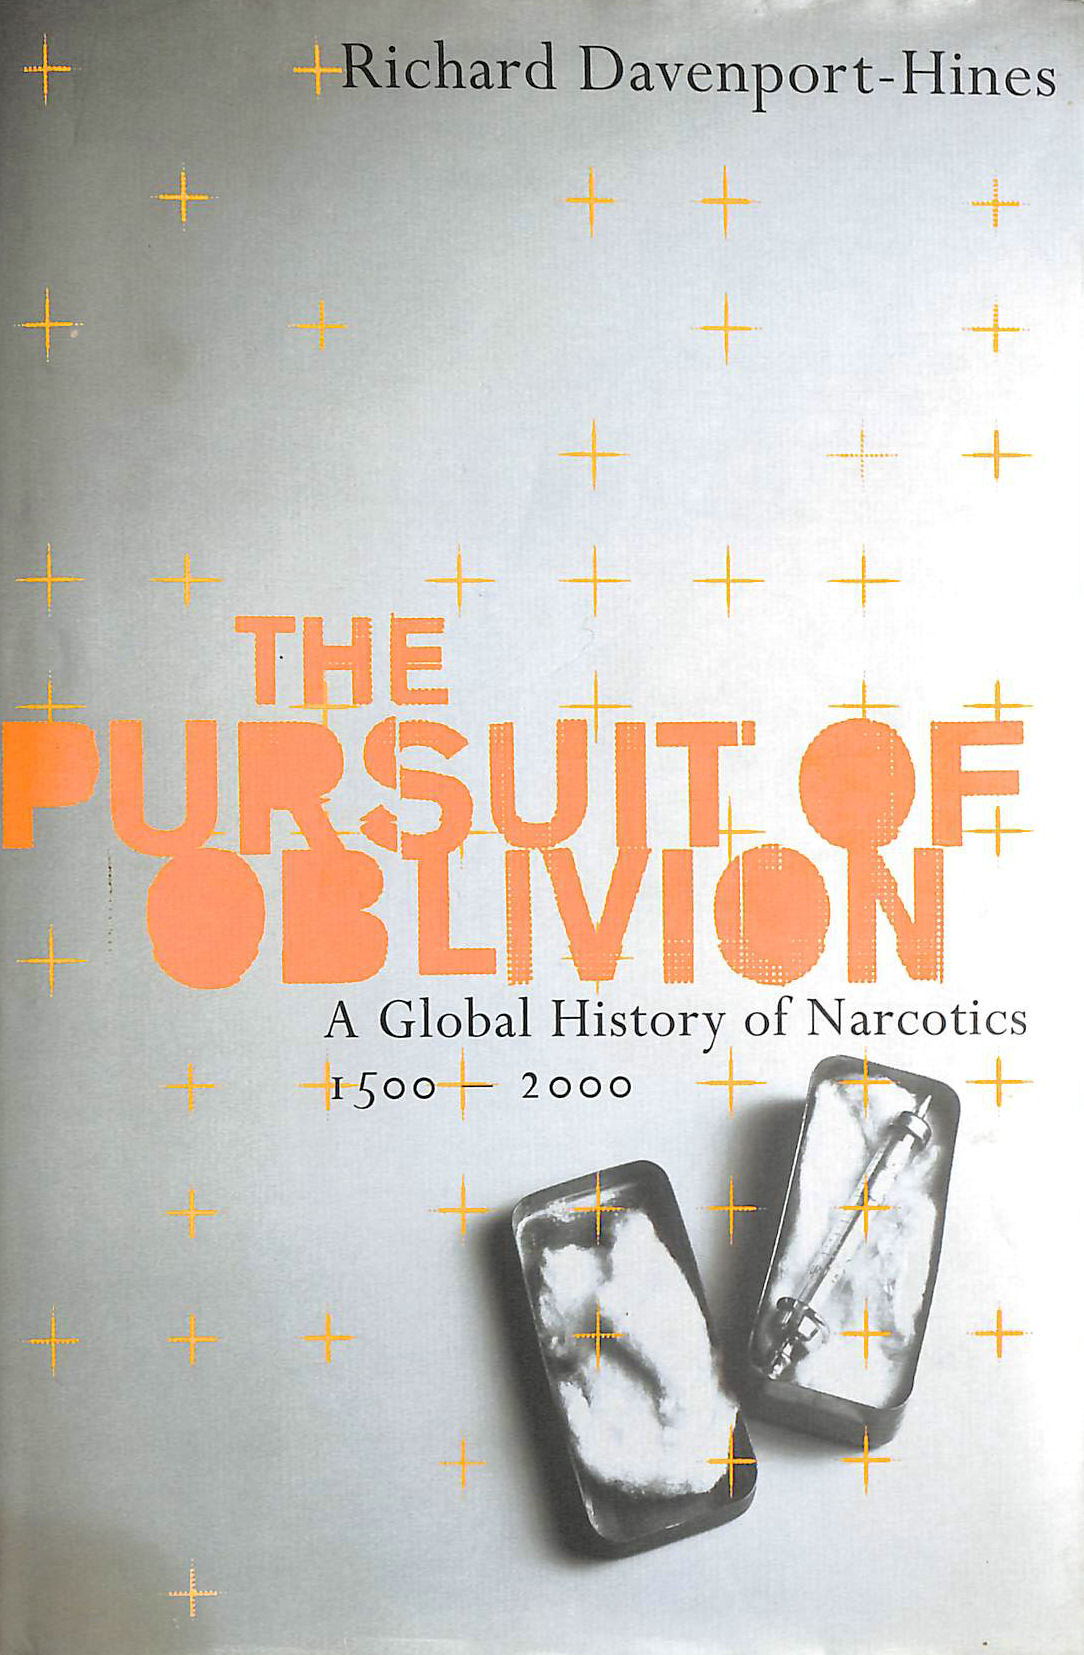 RICHARD DAVENPORT-HINES - The Pursuit of Oblivion: A Global History of Narcotics 1500-2000